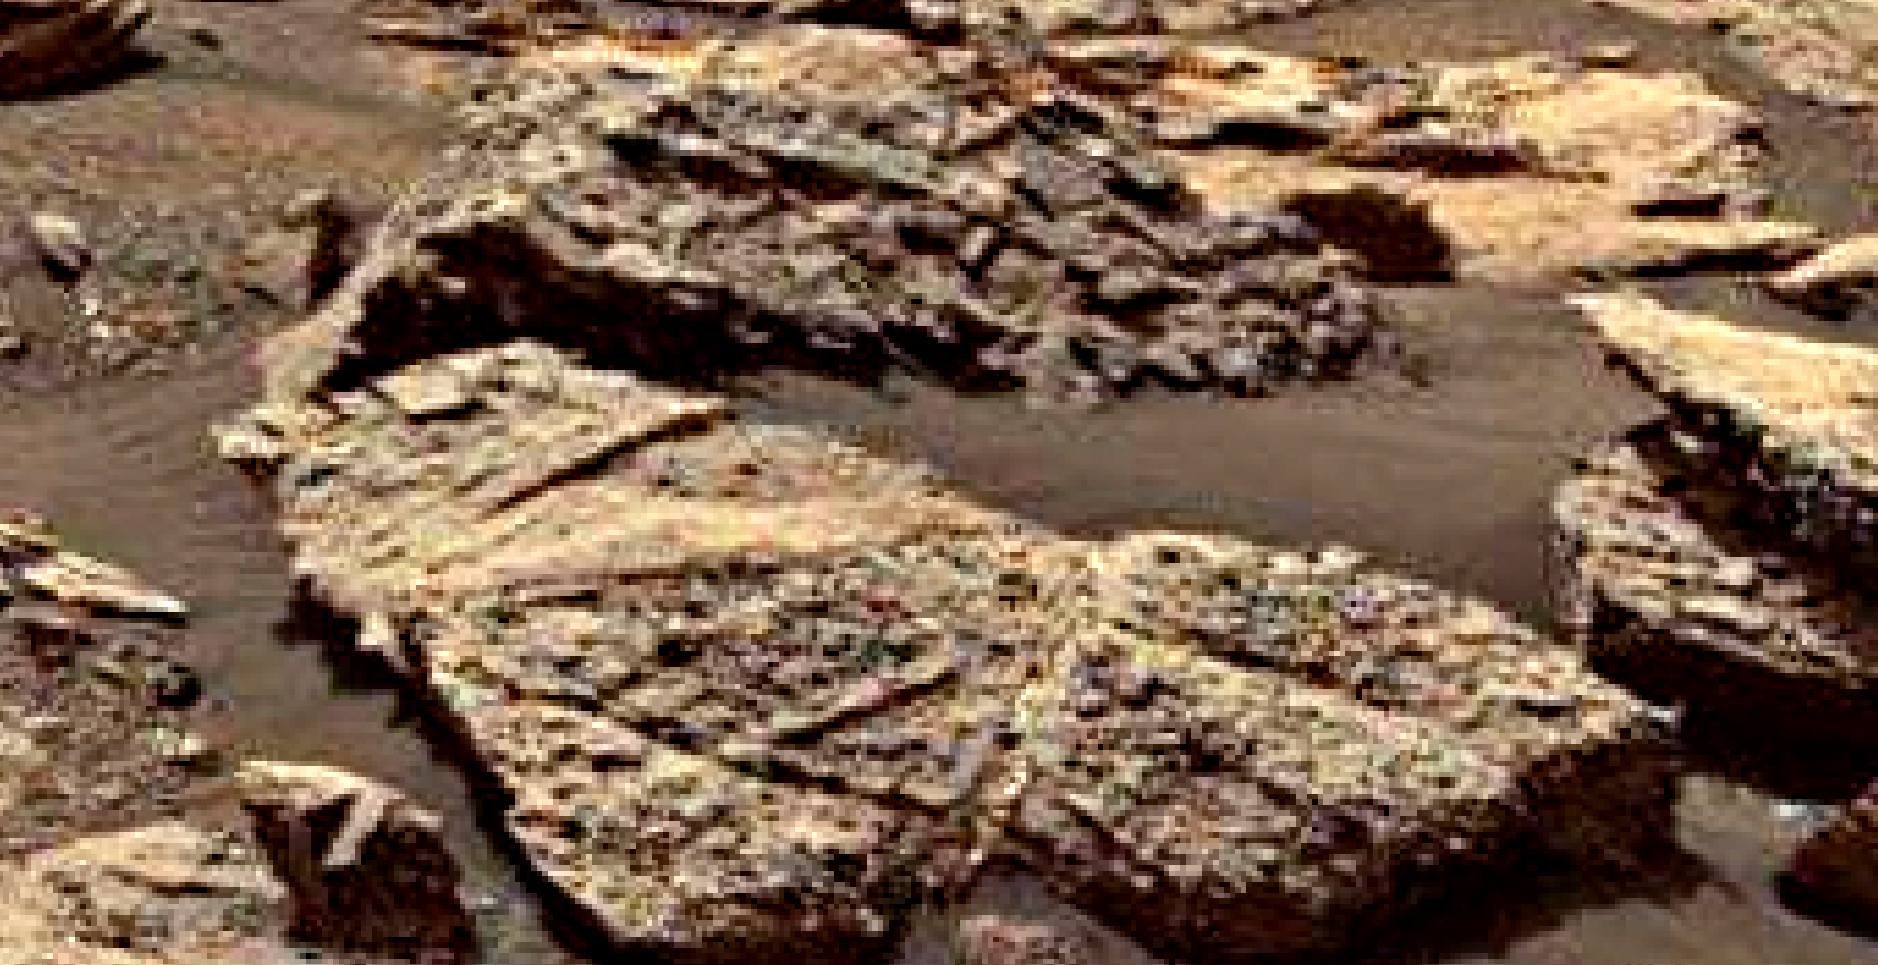 mars-sol-1485-anomaly-artifacts-2-was-life-on-mars